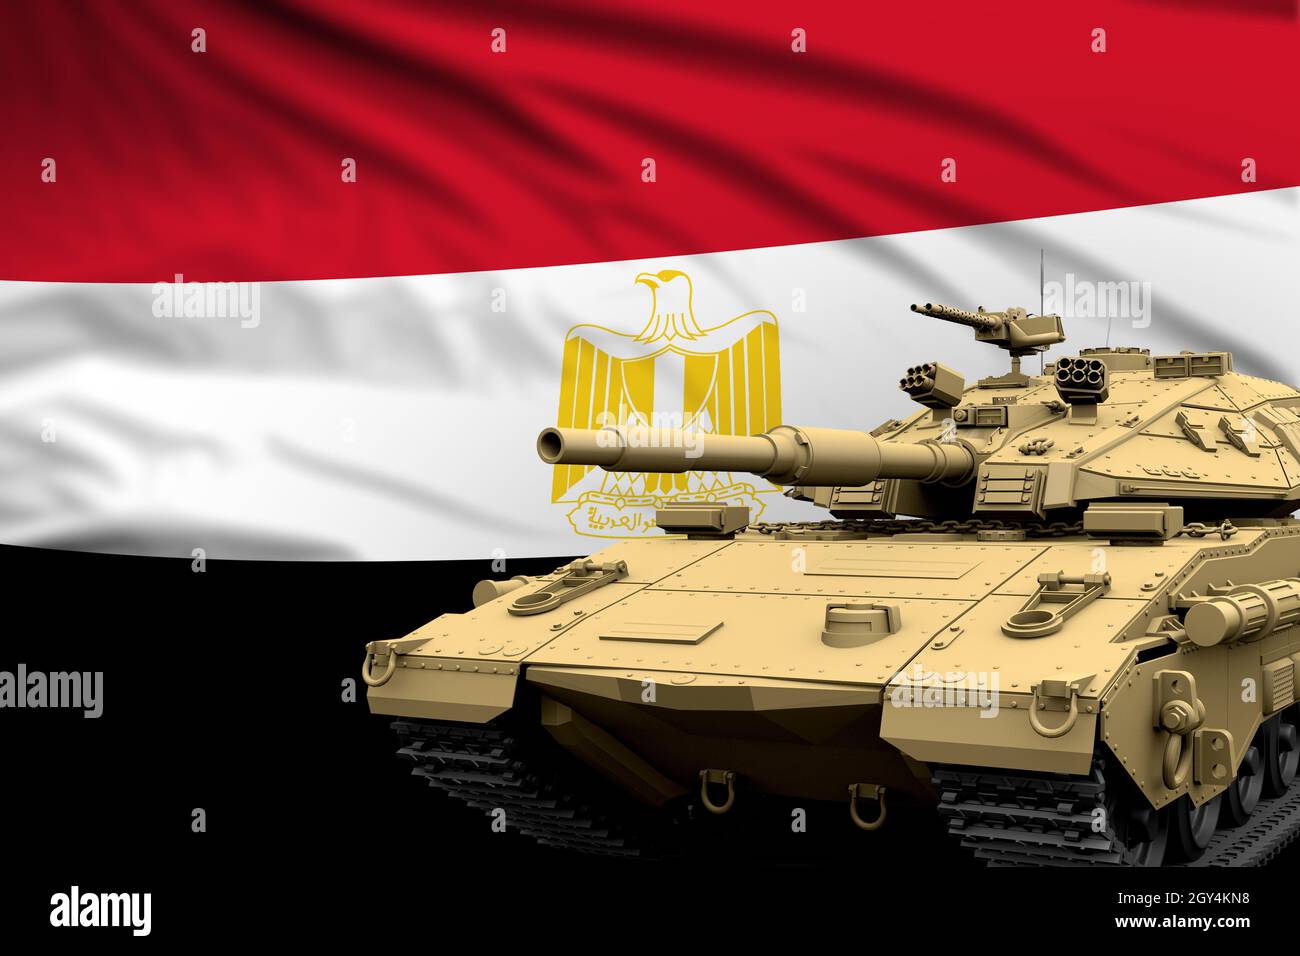 Heavy tank with fictional design on Egypt flag background - modern tank ...